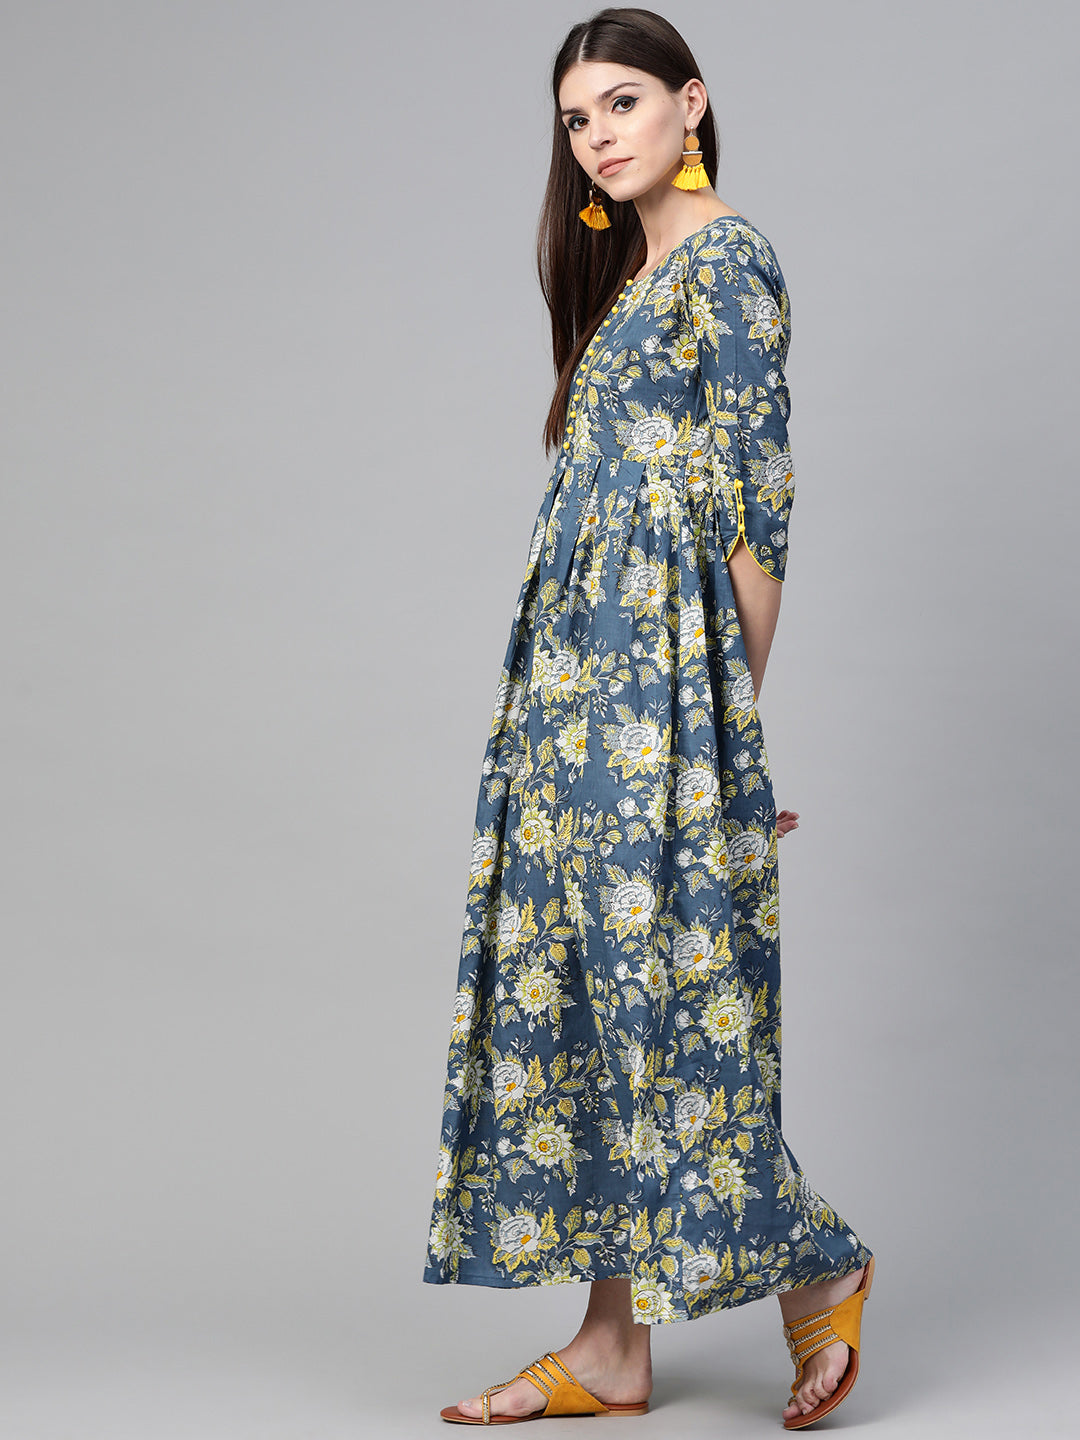 Blue & Yellow Floral Printed Maxi Dress